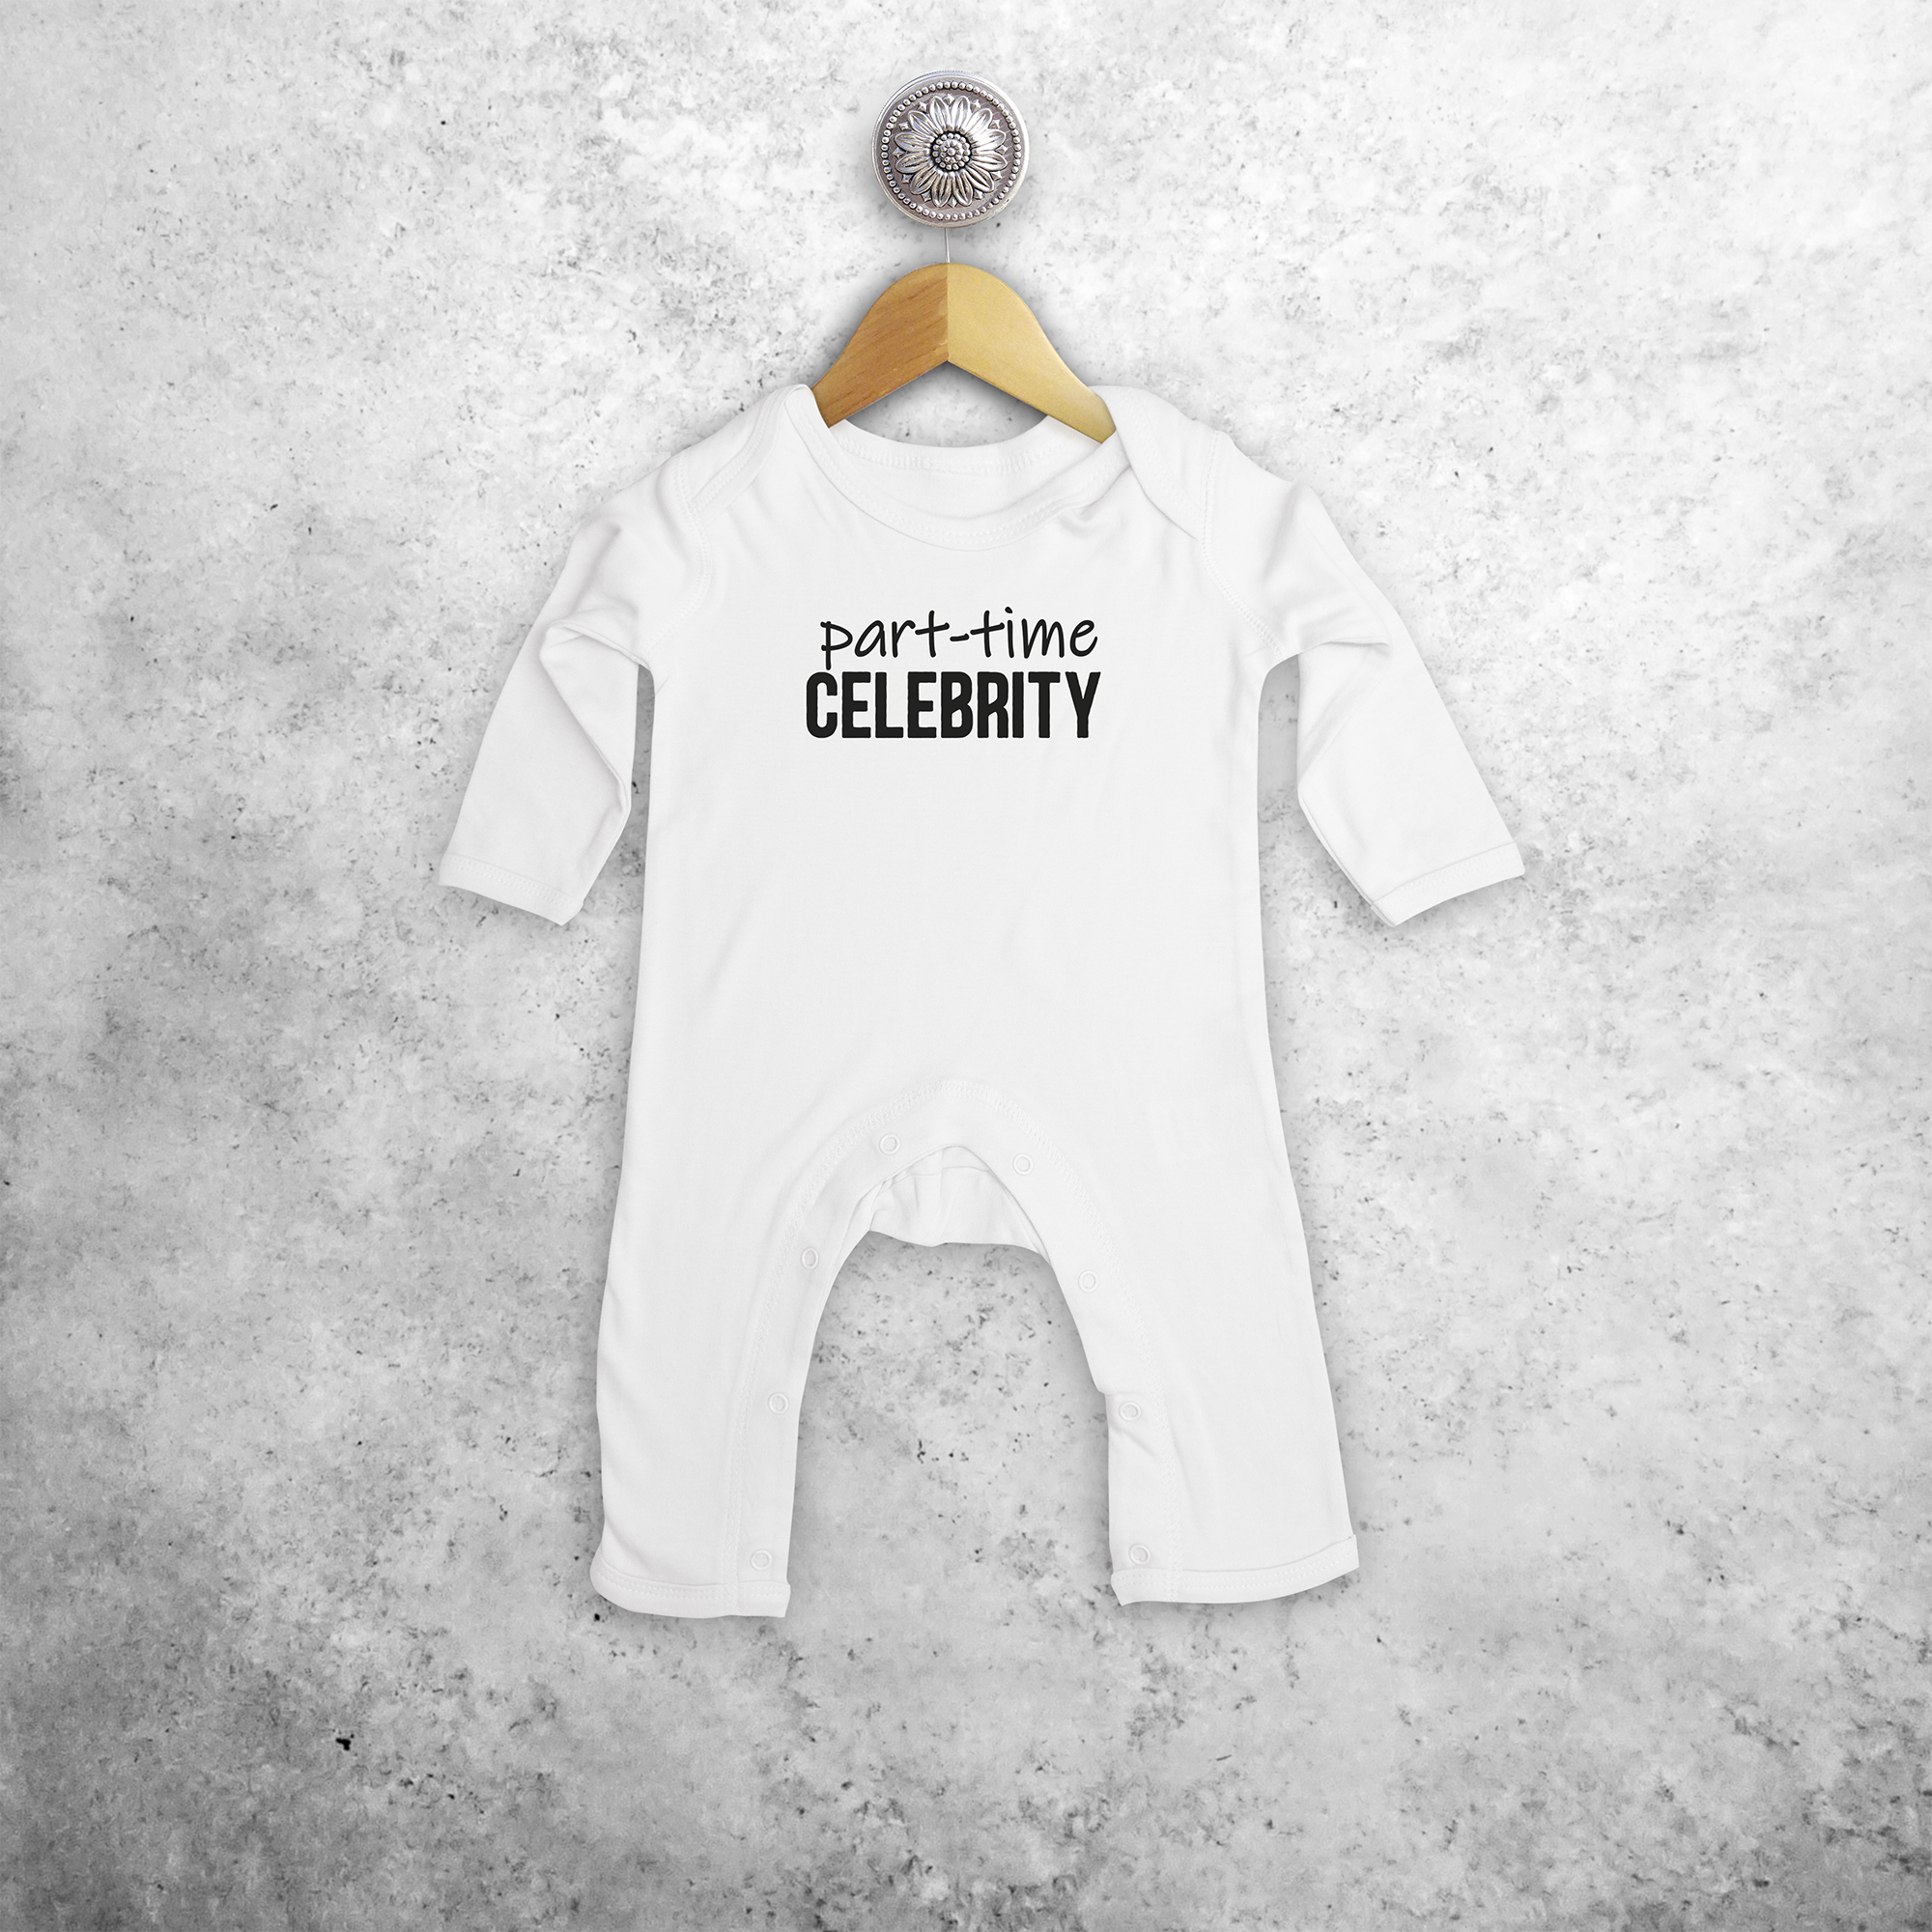 'Part-time celebrity' baby romper